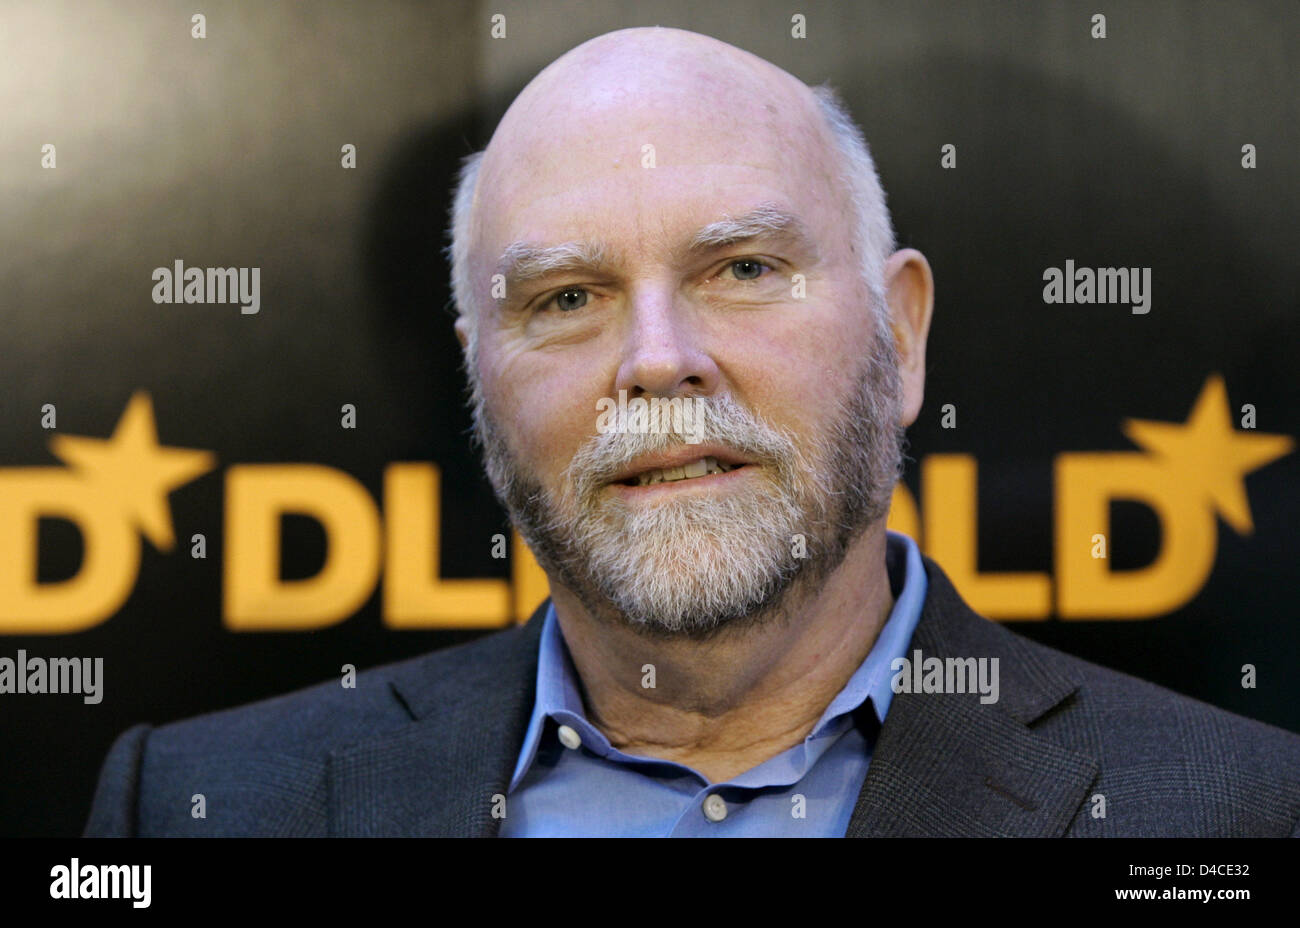 Biologist Craig Venter is pictured at the Digital-Life-Design (DLD) congress in Munich, Germany, 21 January 2008. Media entrepreneur Hubert Burda invites his guests from 20 to 22 January to discuss issues of the 21st century at the DLD conference. Photo: Matthias Schrader Stock Photo